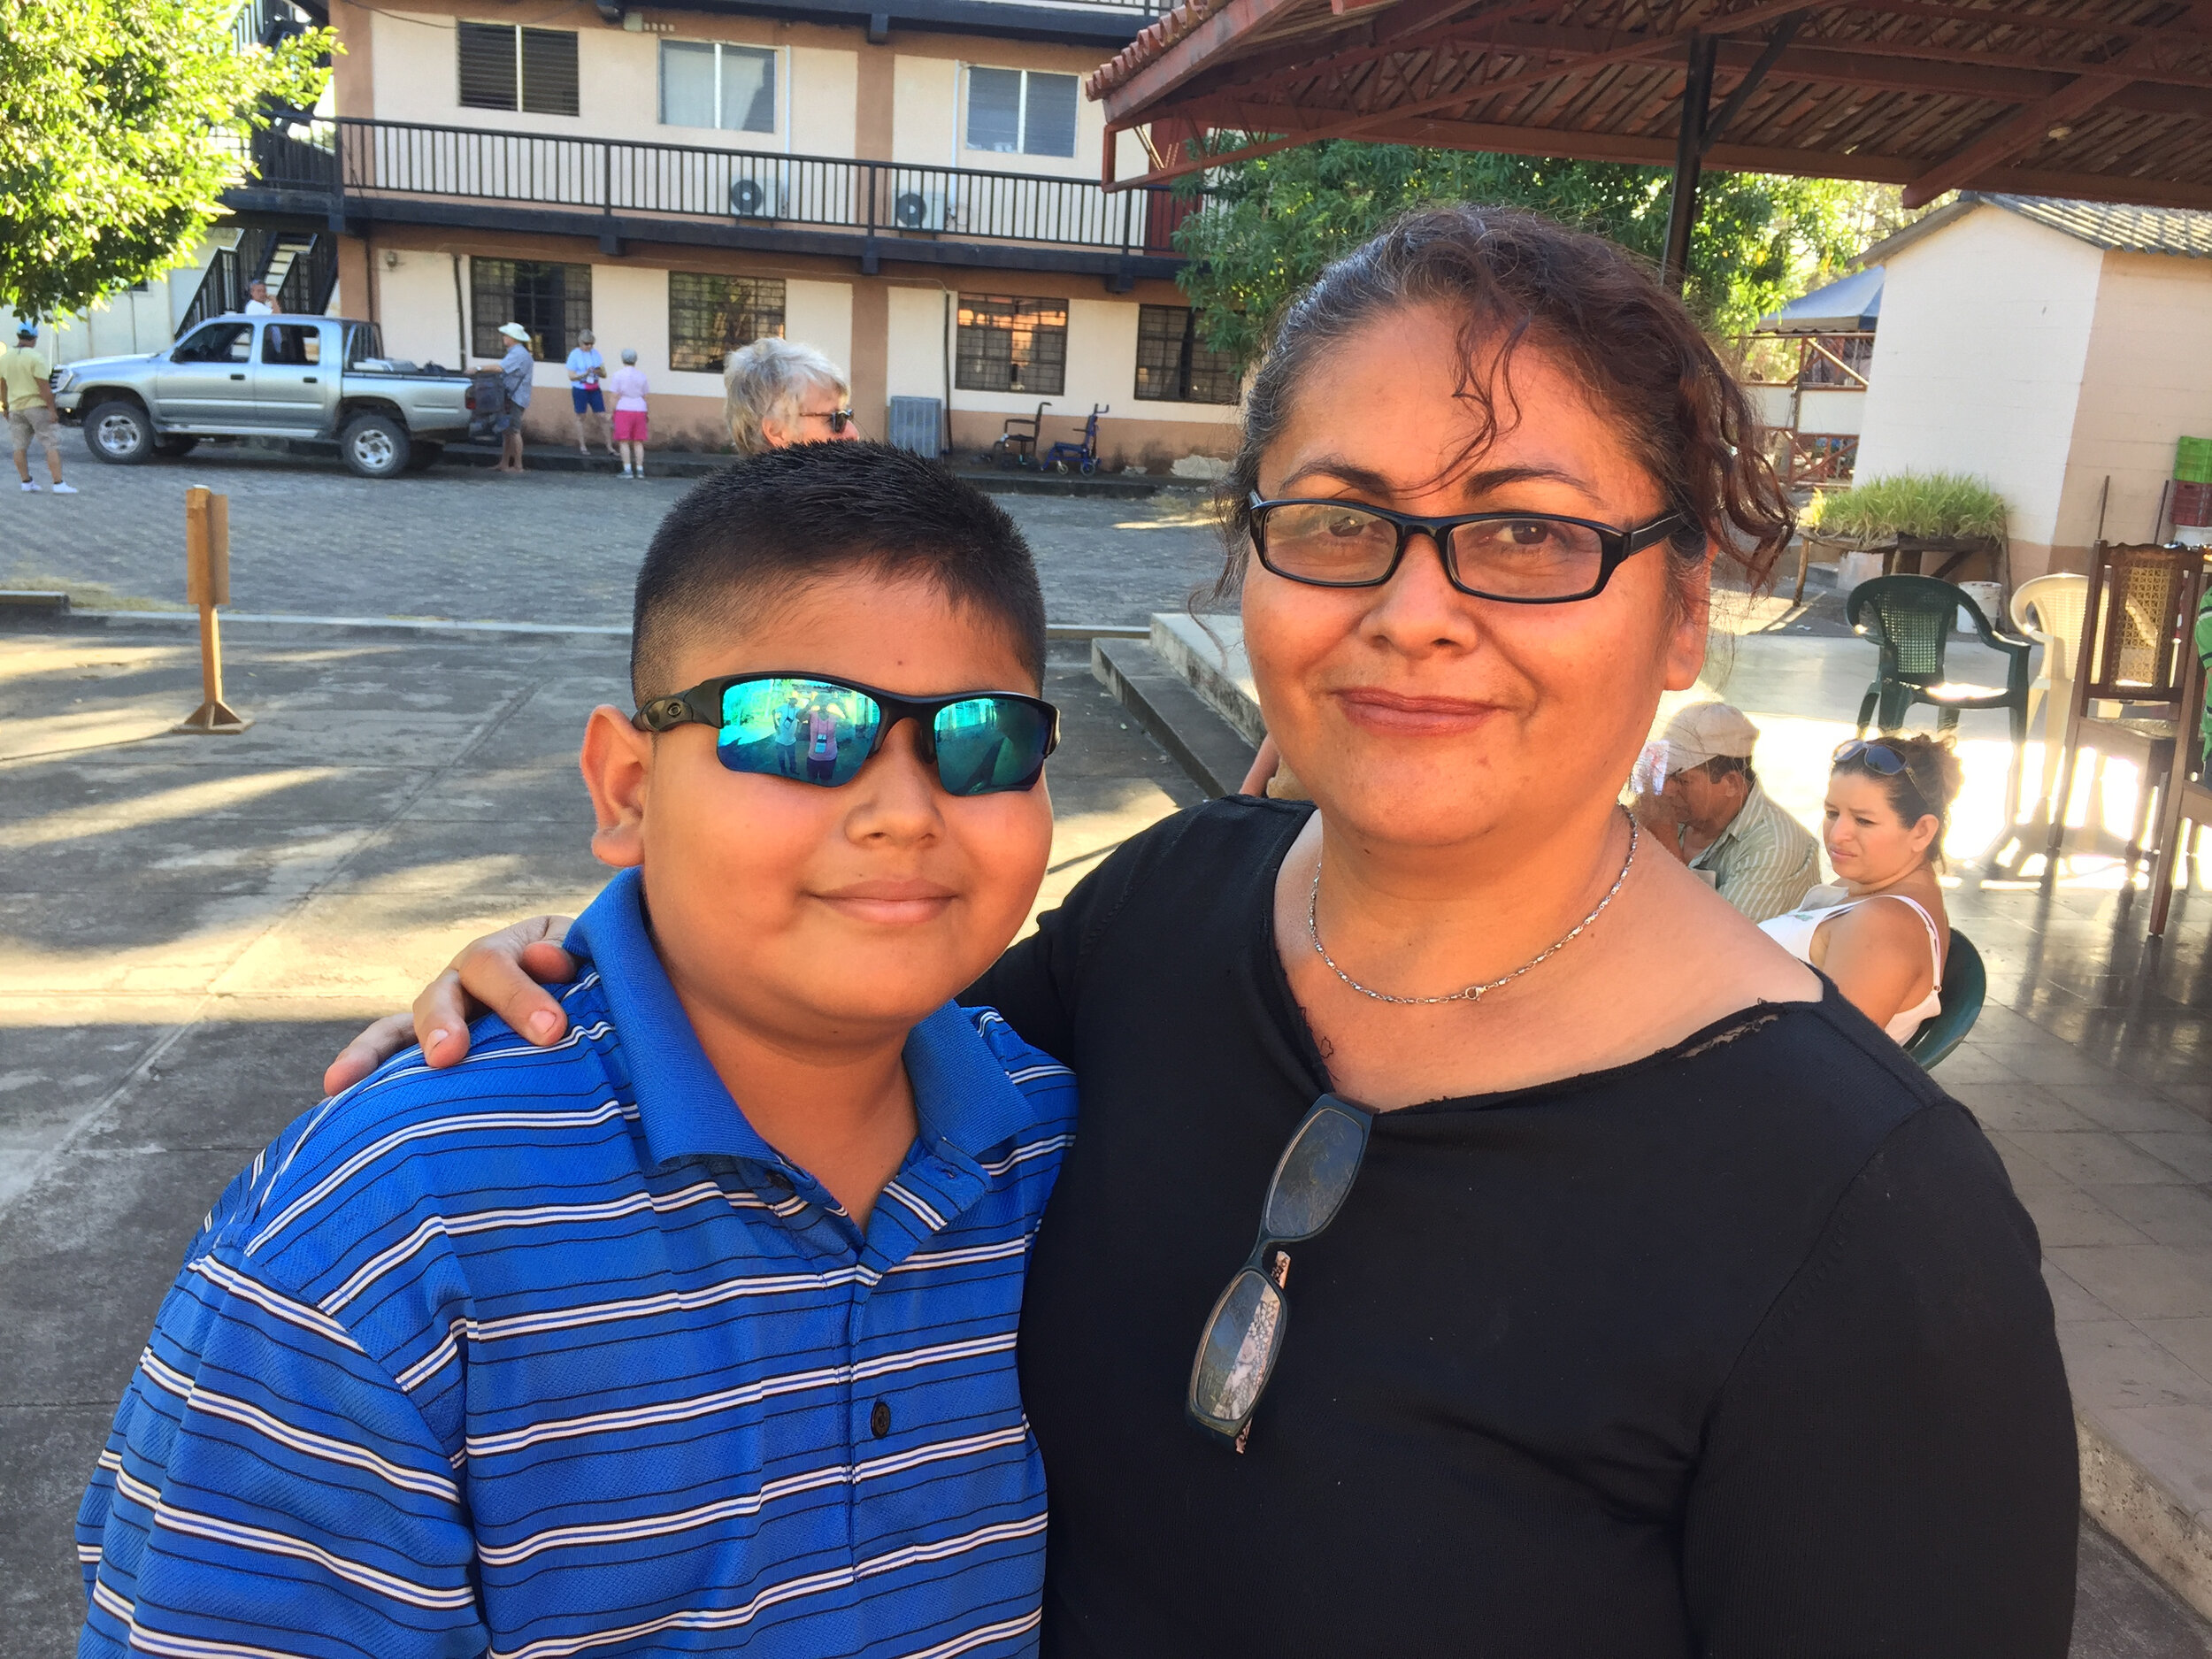 El Salvadoran mother and son showing off their new eyeglasses.